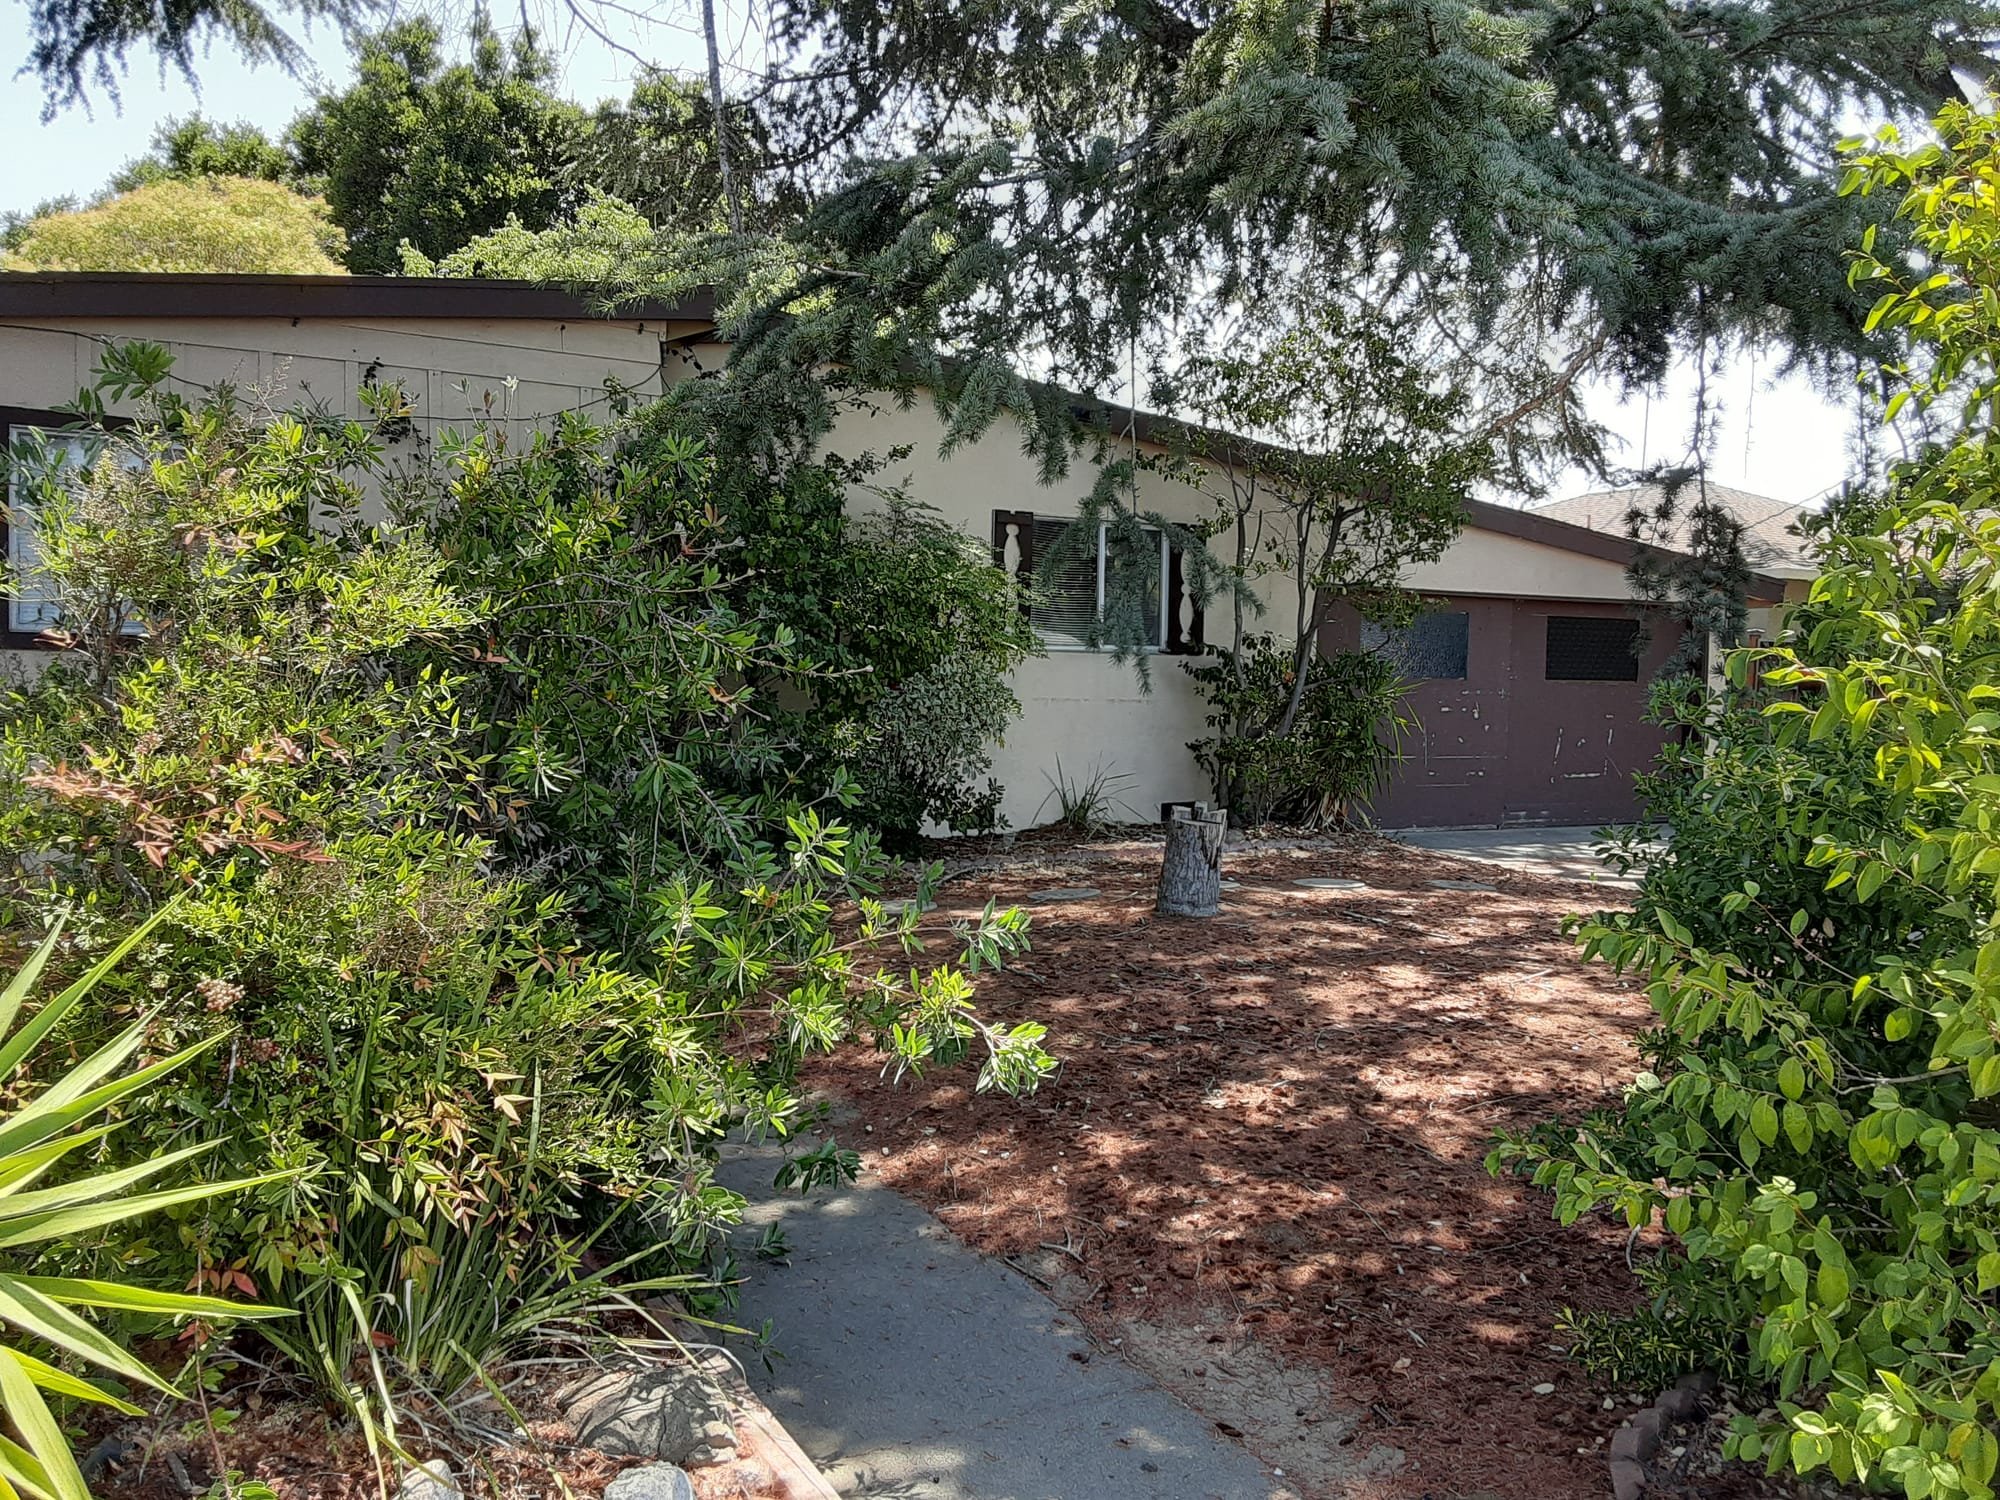 15220 Dickens Ave, San Jose, Ca. SOLD $1,570,000 "AS IS"